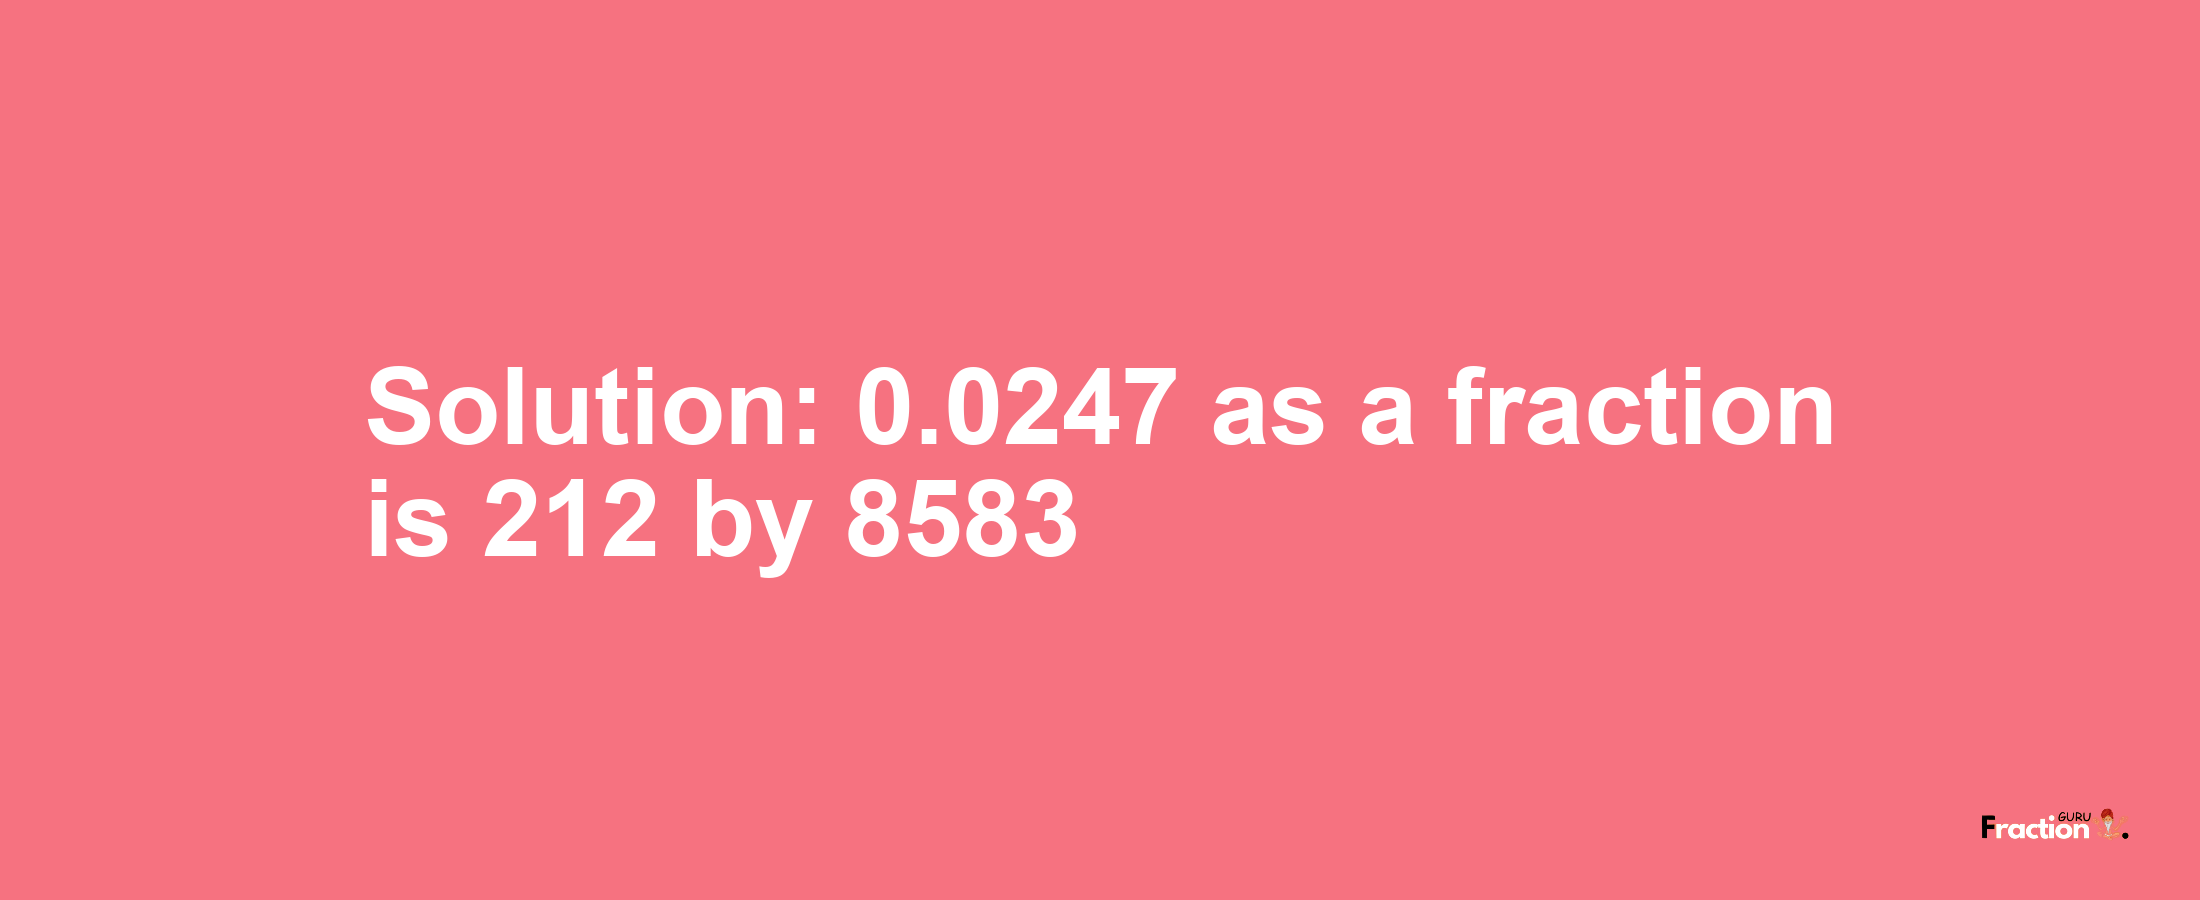 Solution:0.0247 as a fraction is 212/8583